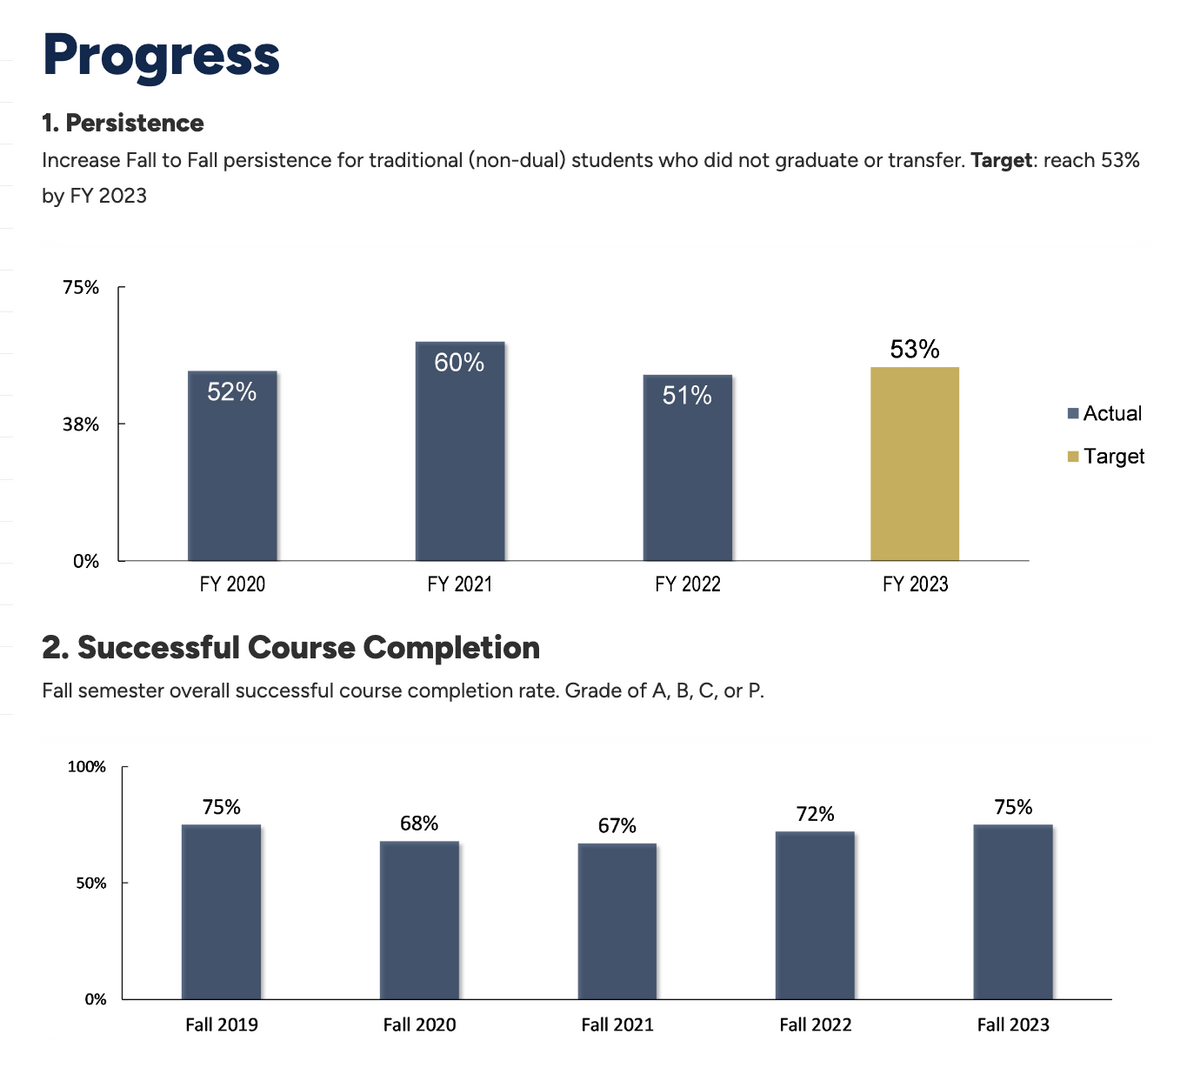 Progress
1. Persistence
Increase Fall to Fall persistence for traditional (non-dual) students who did not graduate or transfer. Target: reach 53%
by FY 2023
75%
38%
0%
100%
50%
52%
0%
FY 2020
2. Successful Course Completion
Fall semester overall successful course completion rate. Grade of A, B, C, or P.
75%
60%
Fall 2019
FY 2021
68%
Fall 2020
67%
51%
Fall 2021
FY 2022
72%
Fall 2022
53%
FY 2023
75%
Fall 2023
Actual
■ Target